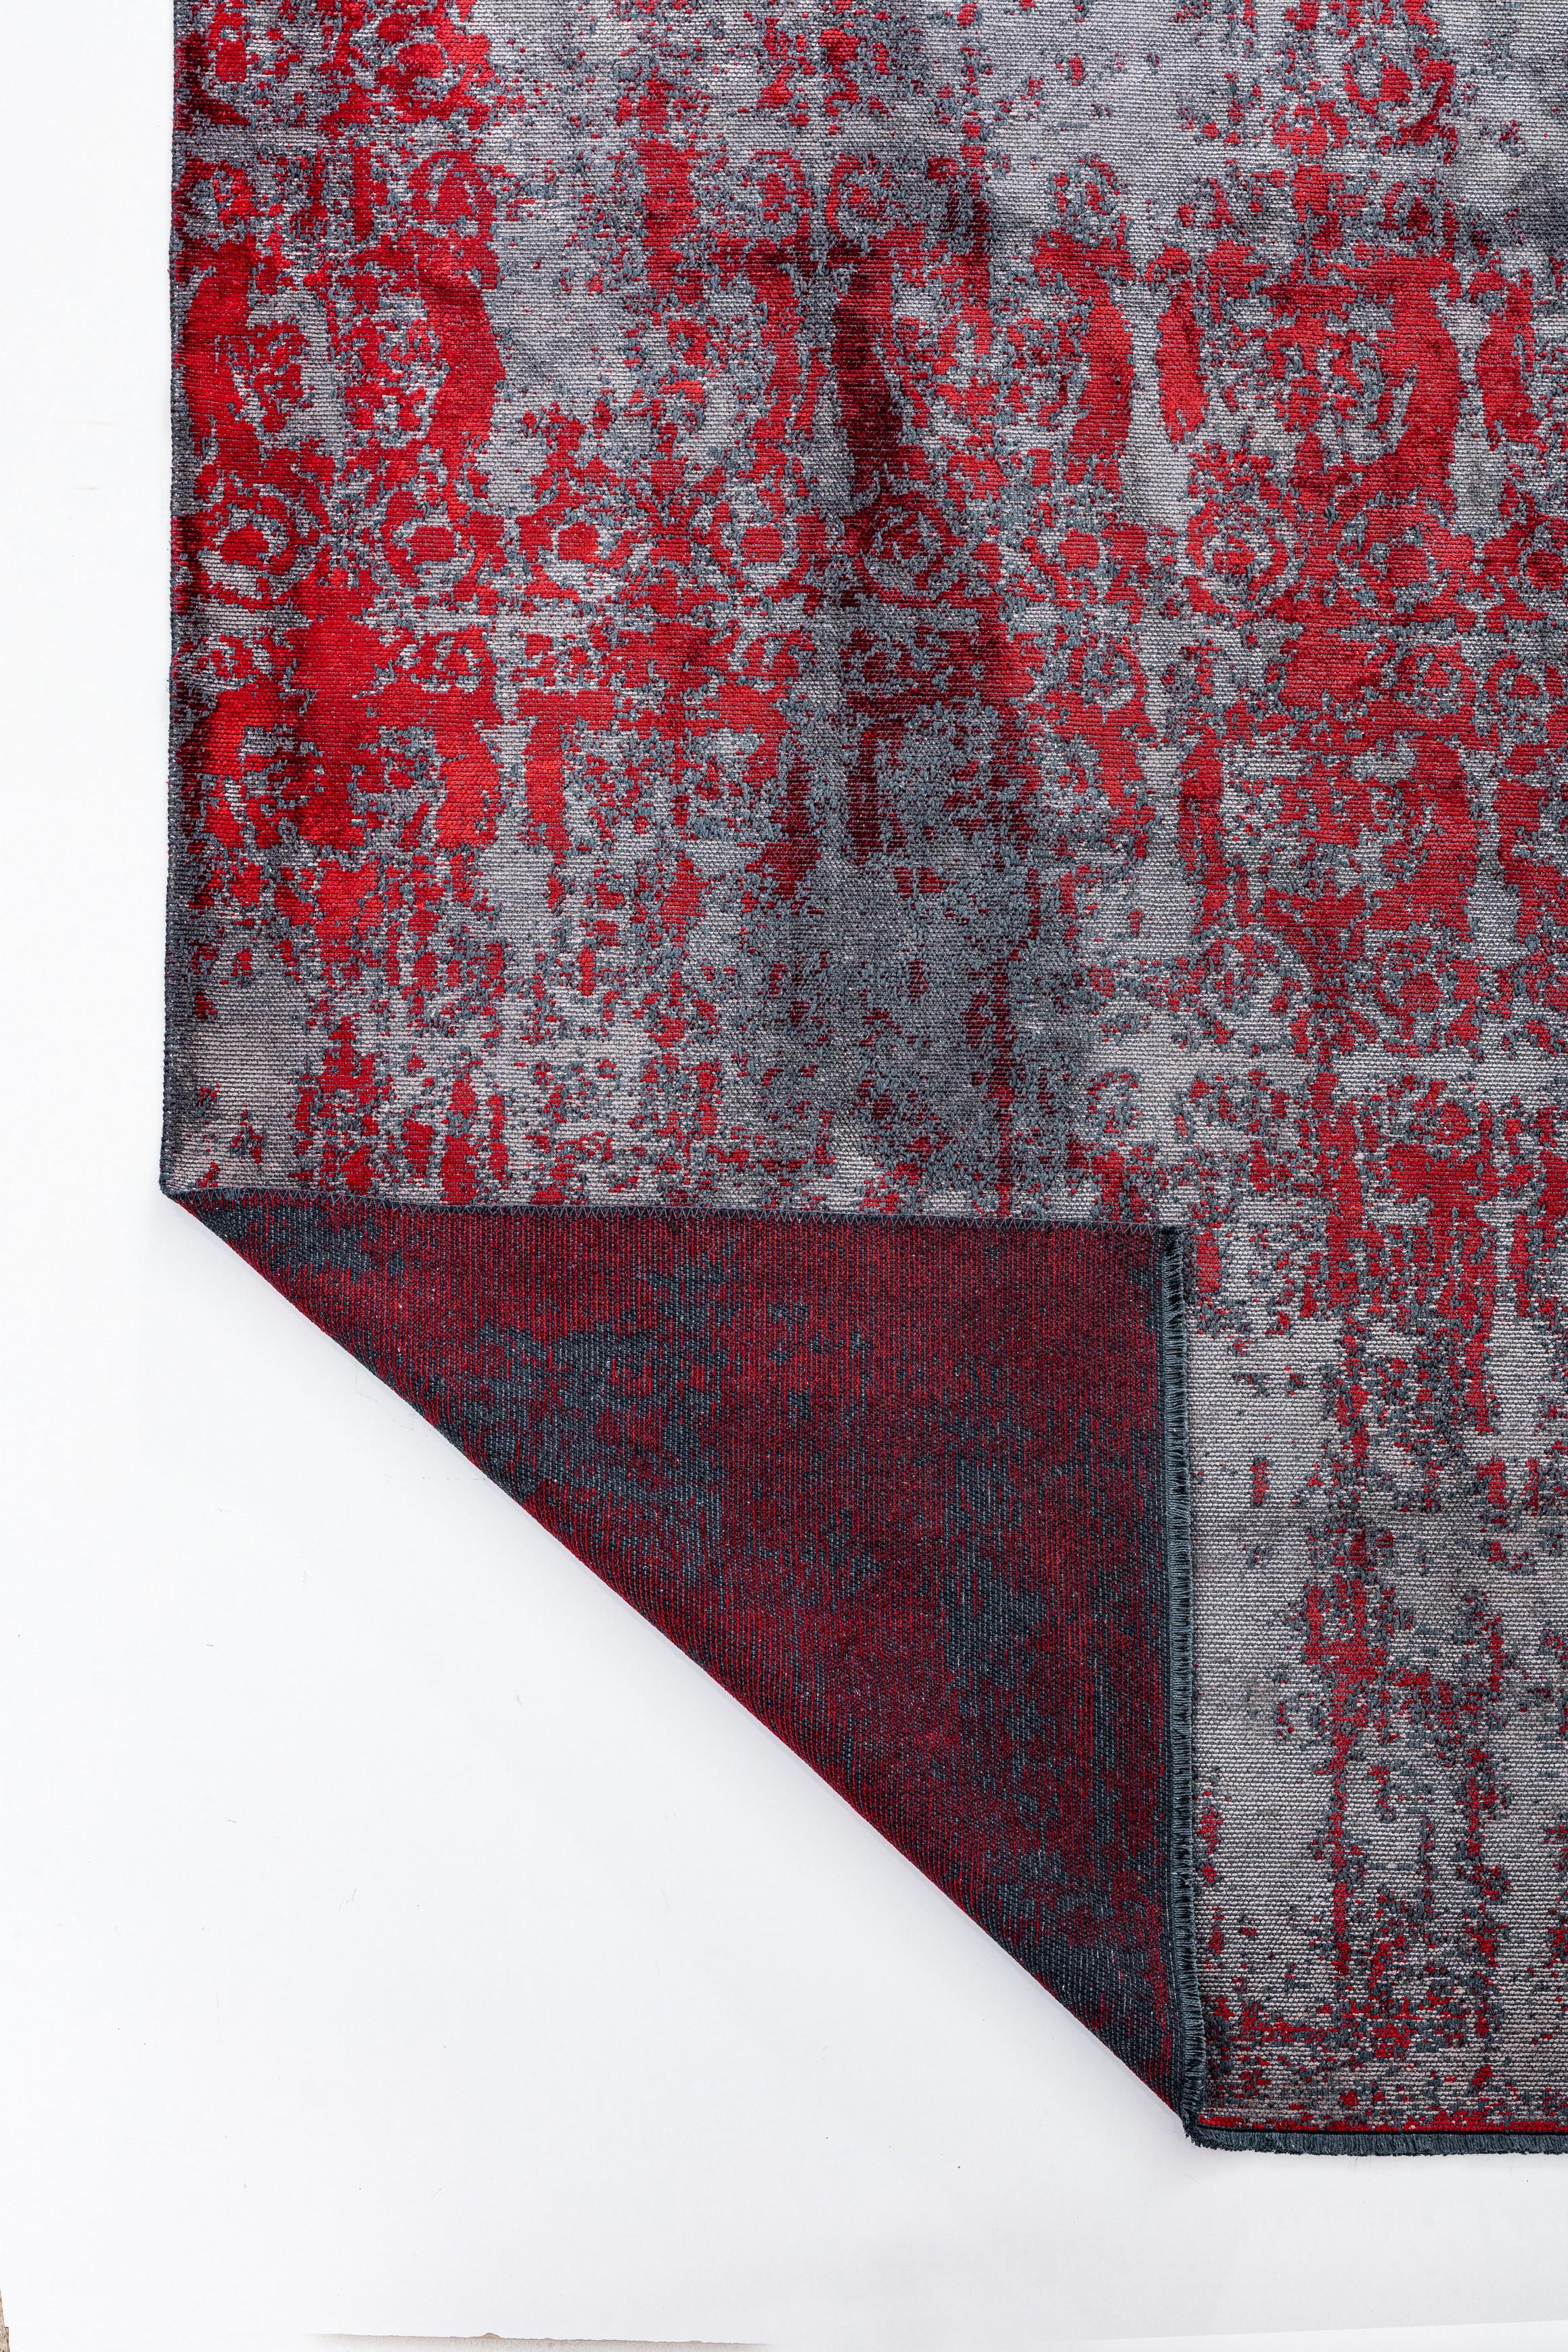 For Sale:  (Red) Modern  Damask Luxury Hand-Finished Area Rug 3